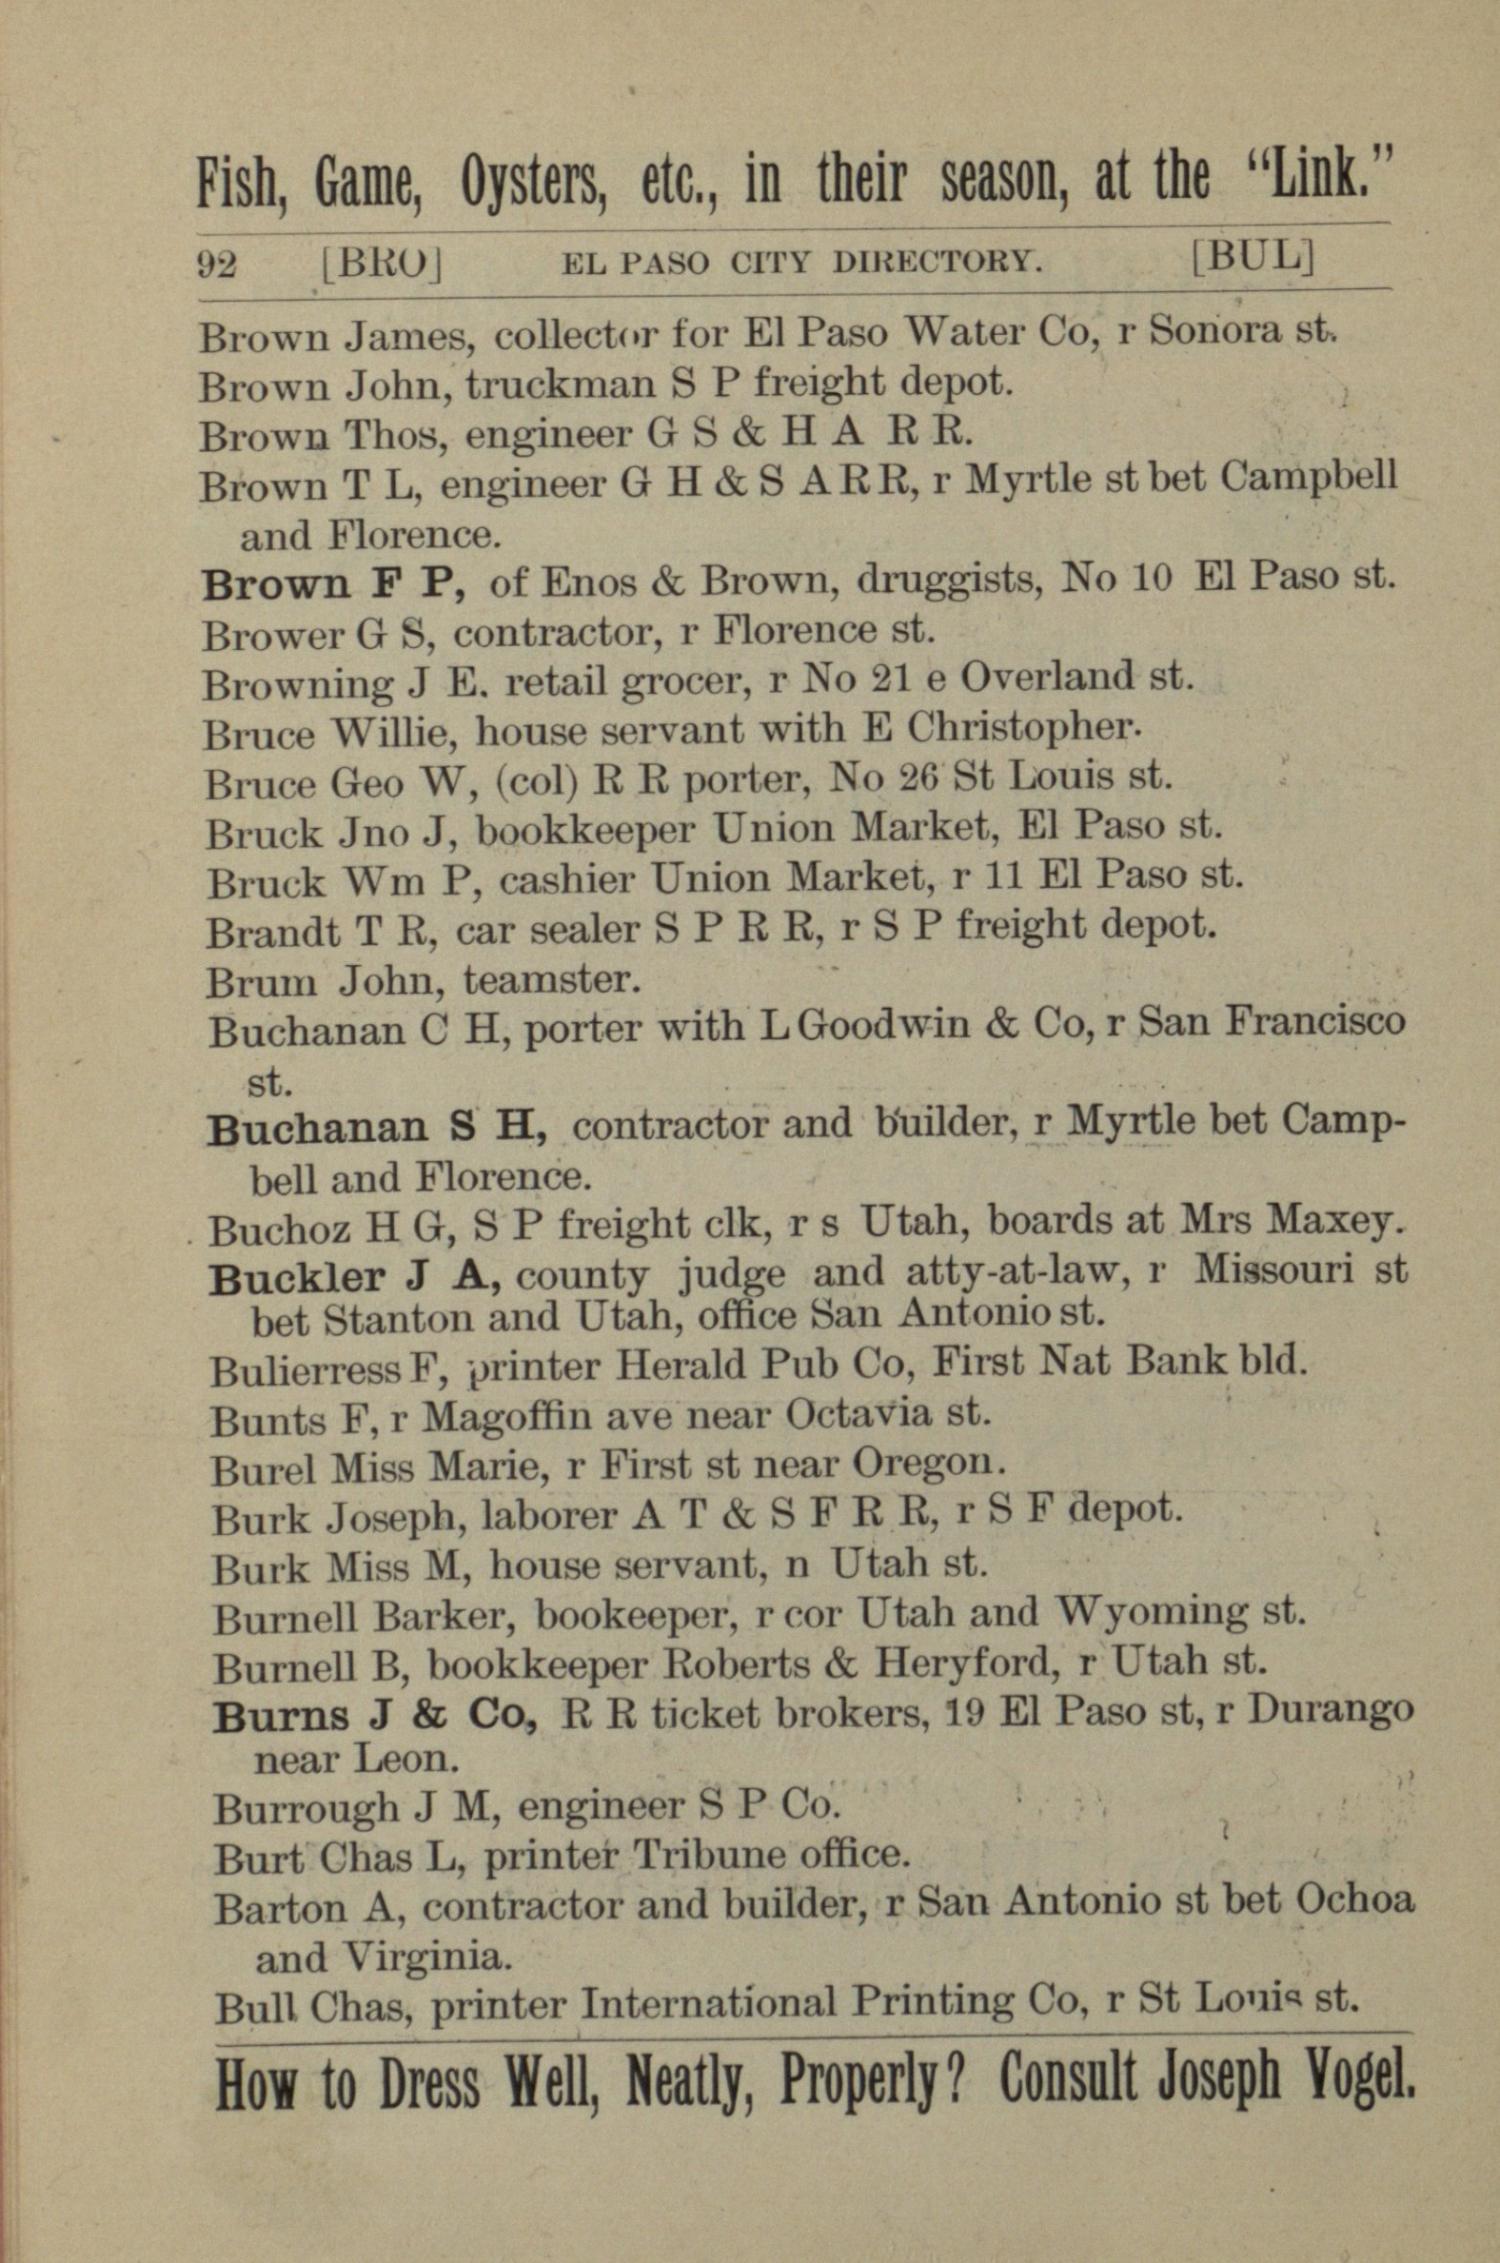 General Directory of the City of El Paso for 1886-87.
                                                
                                                    92
                                                